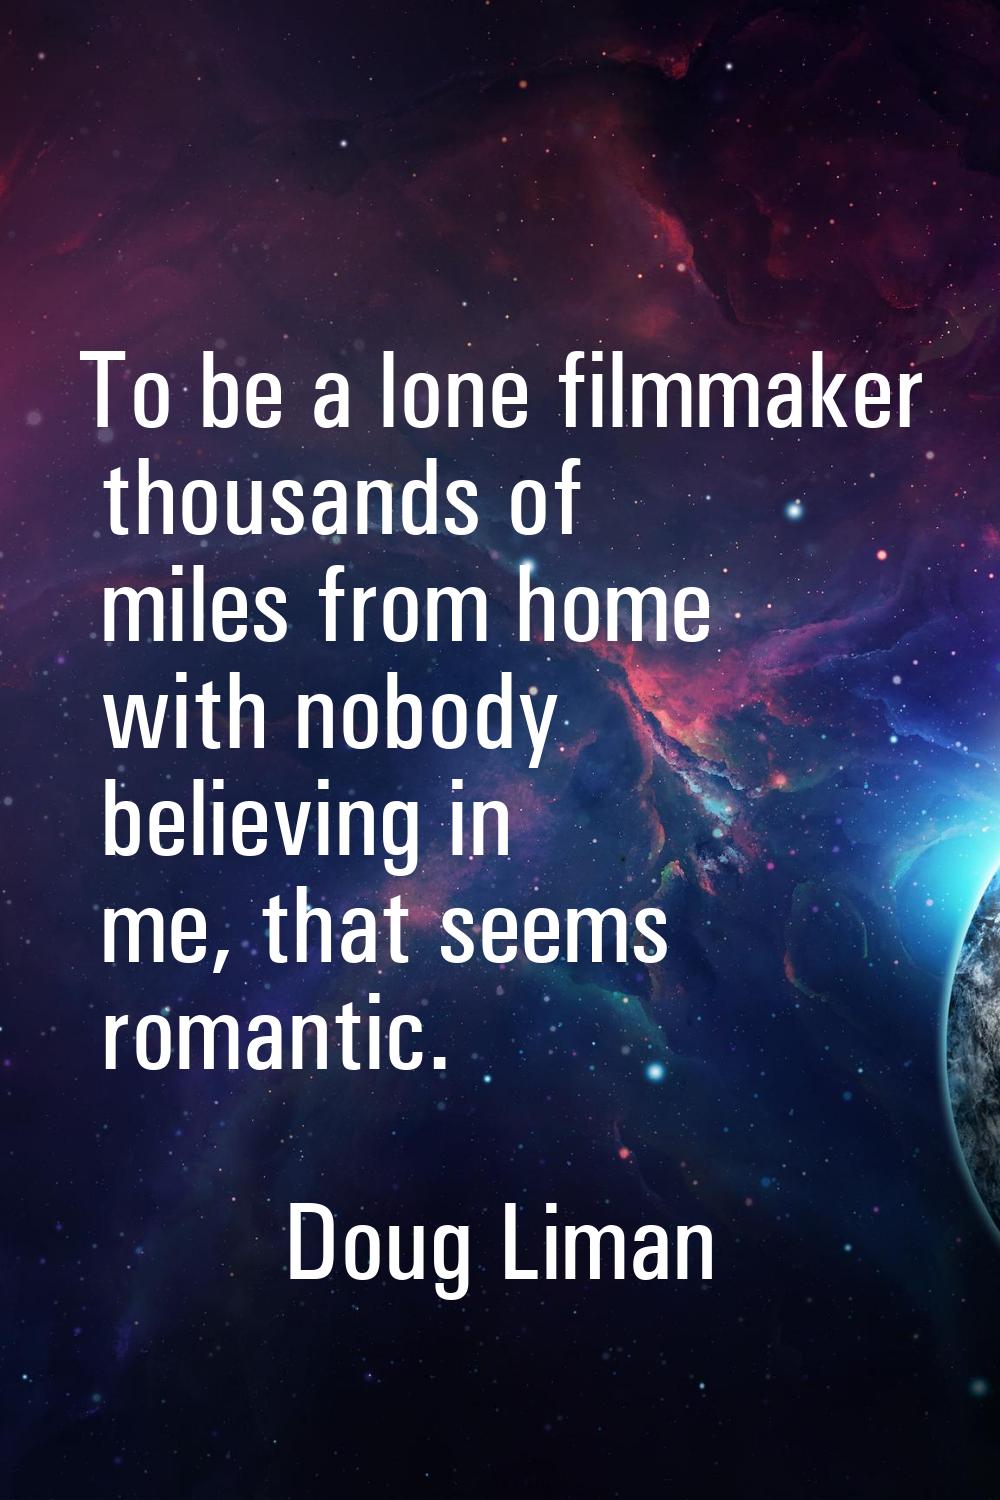 To be a lone filmmaker thousands of miles from home with nobody believing in me, that seems romanti